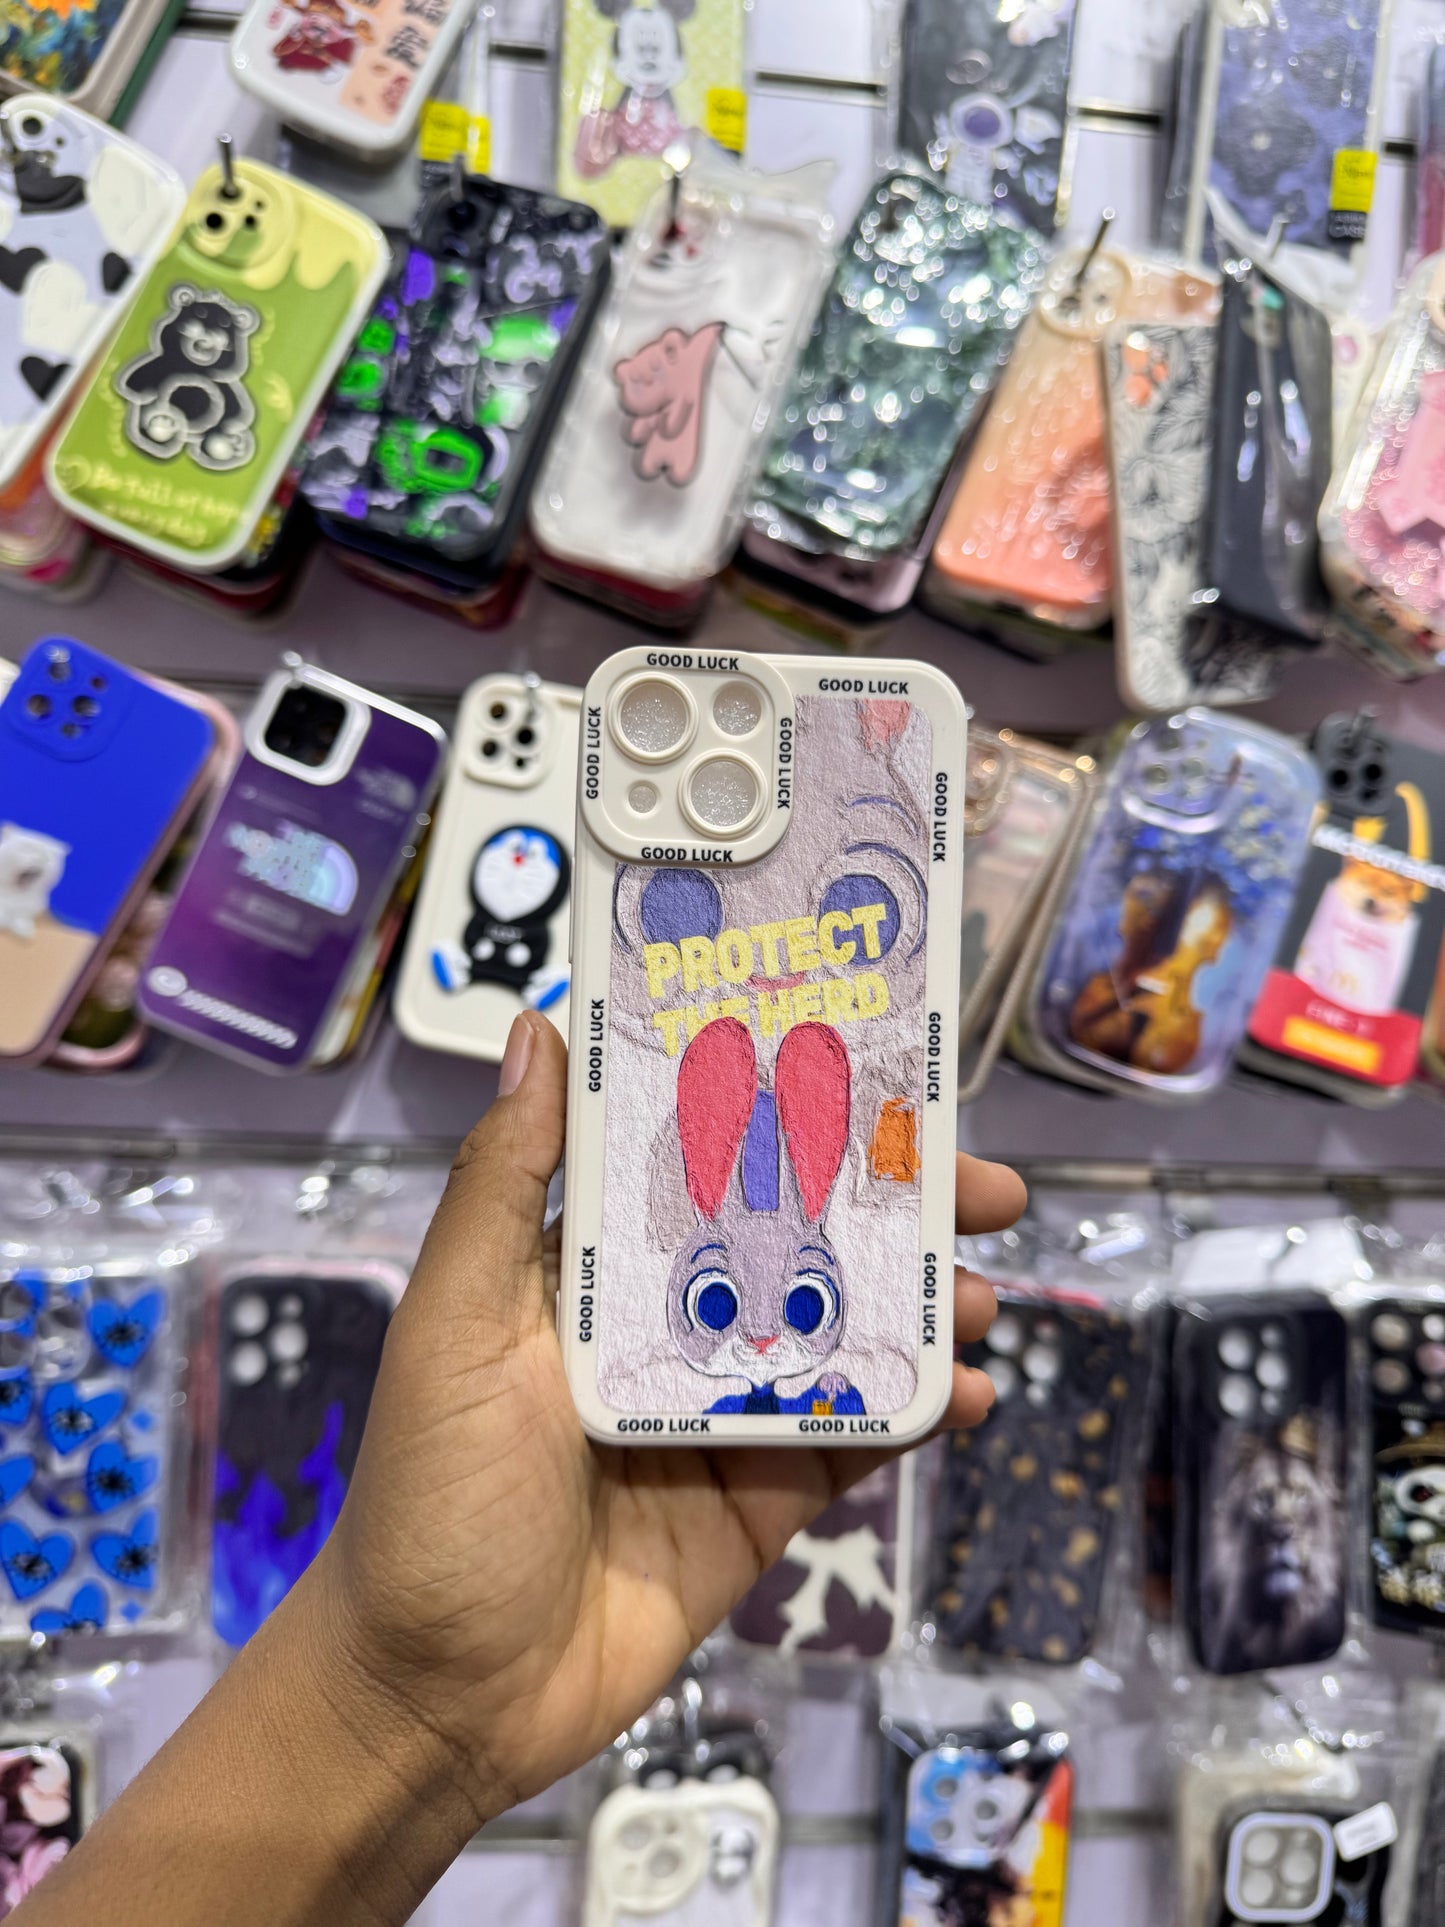 Protect the herd Case For IPhones